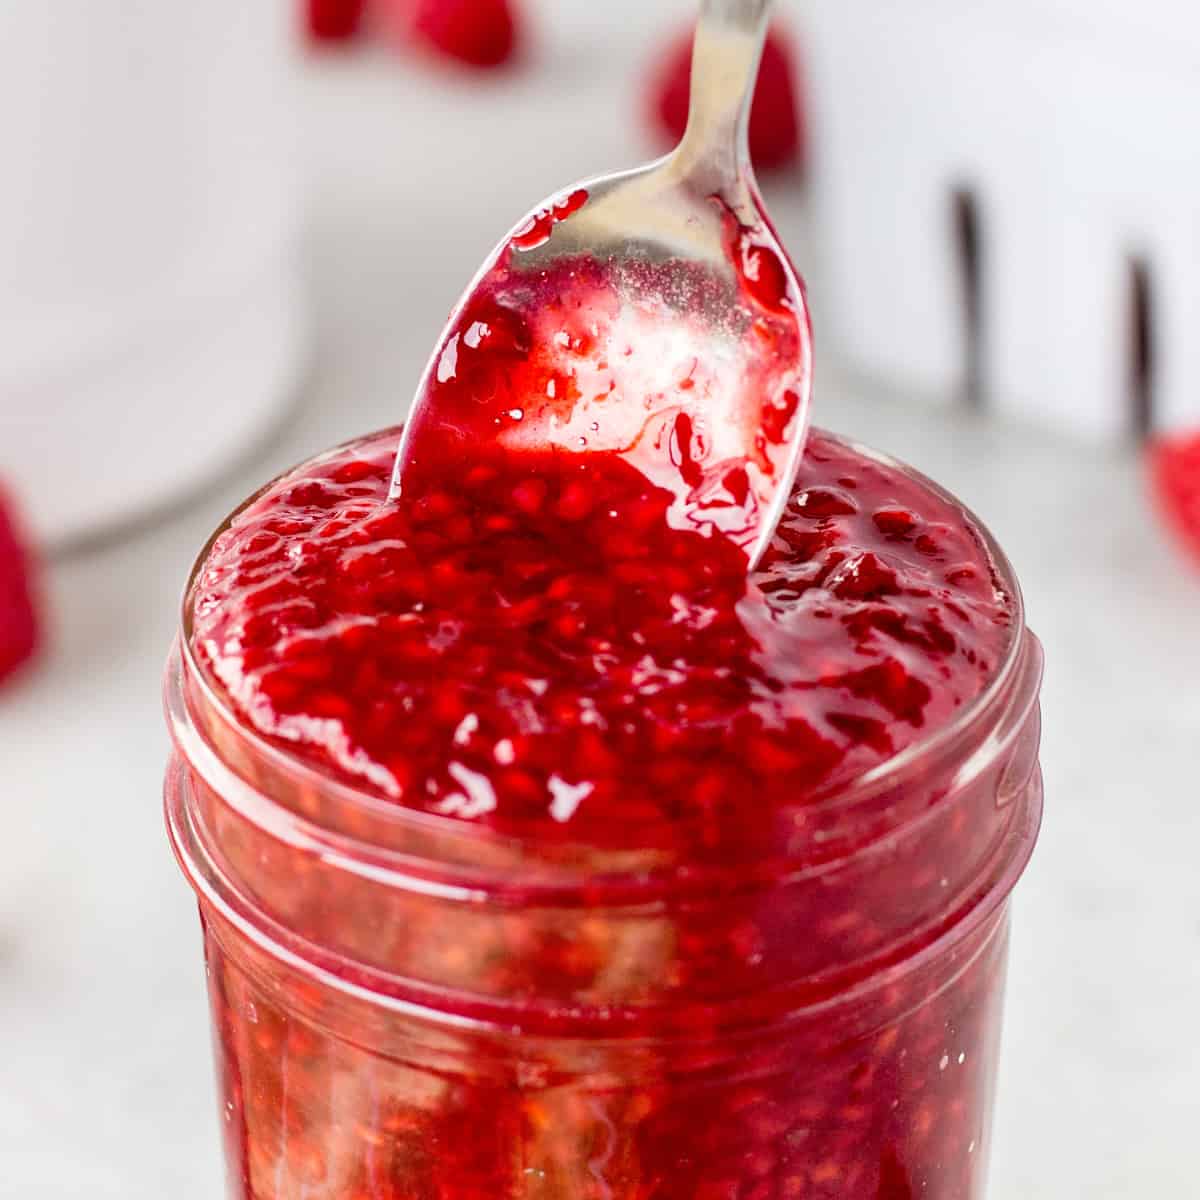 Pulling a spoon out of a jar of raspberry sauce